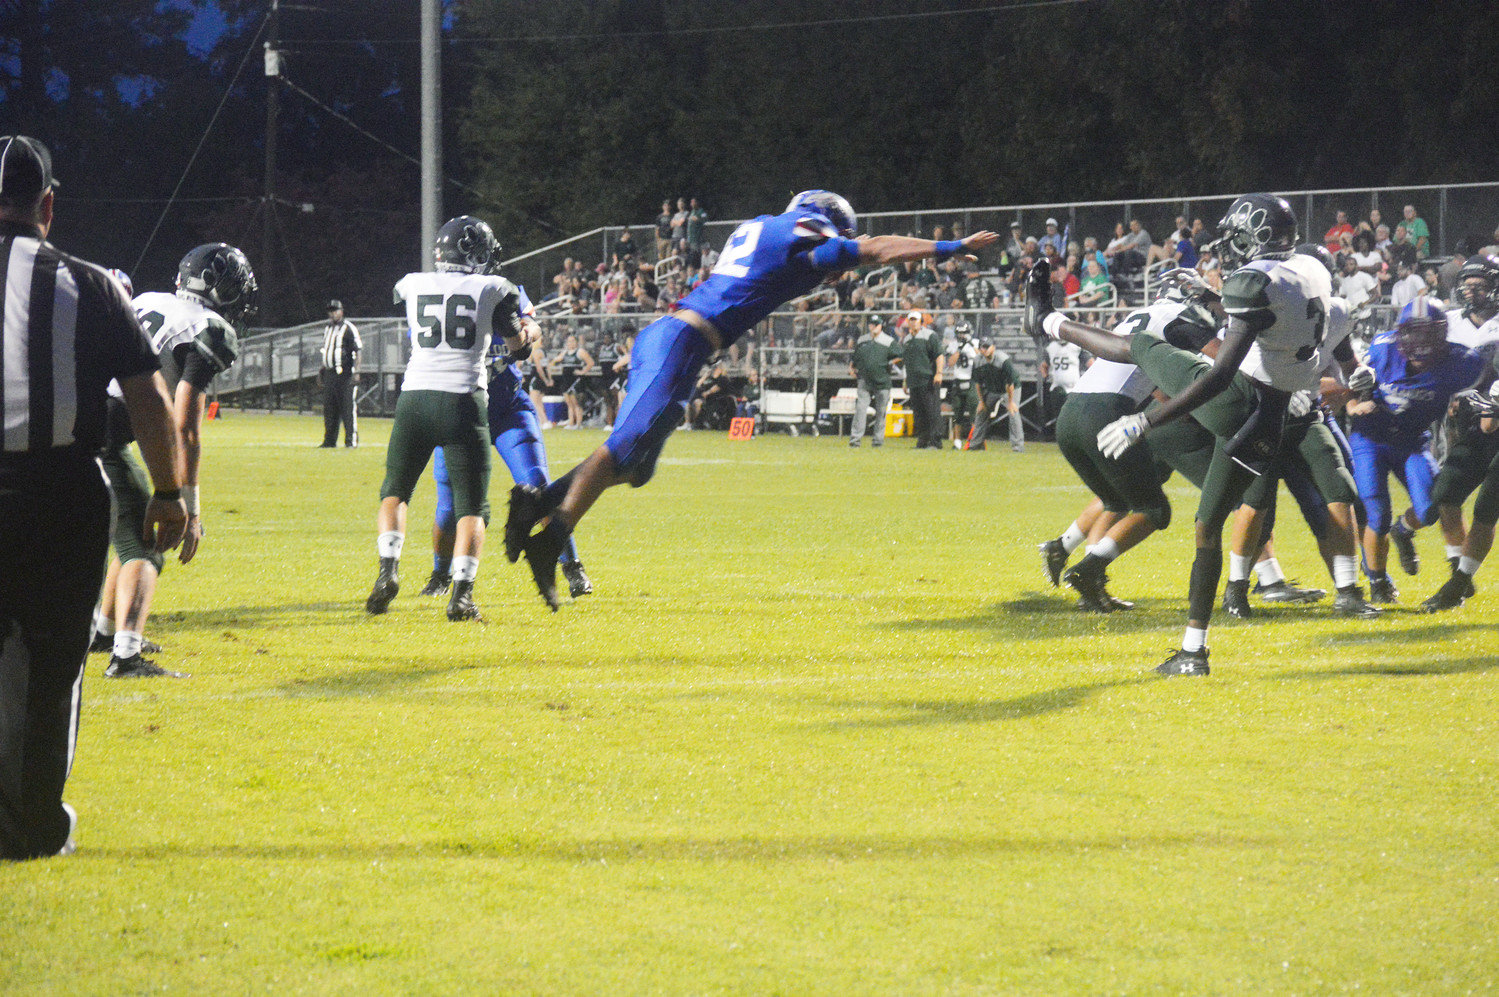 A Quitman Bulldog comes close to blocking a punt by Scurry-Rosser in Friday’s weather plagued football game.